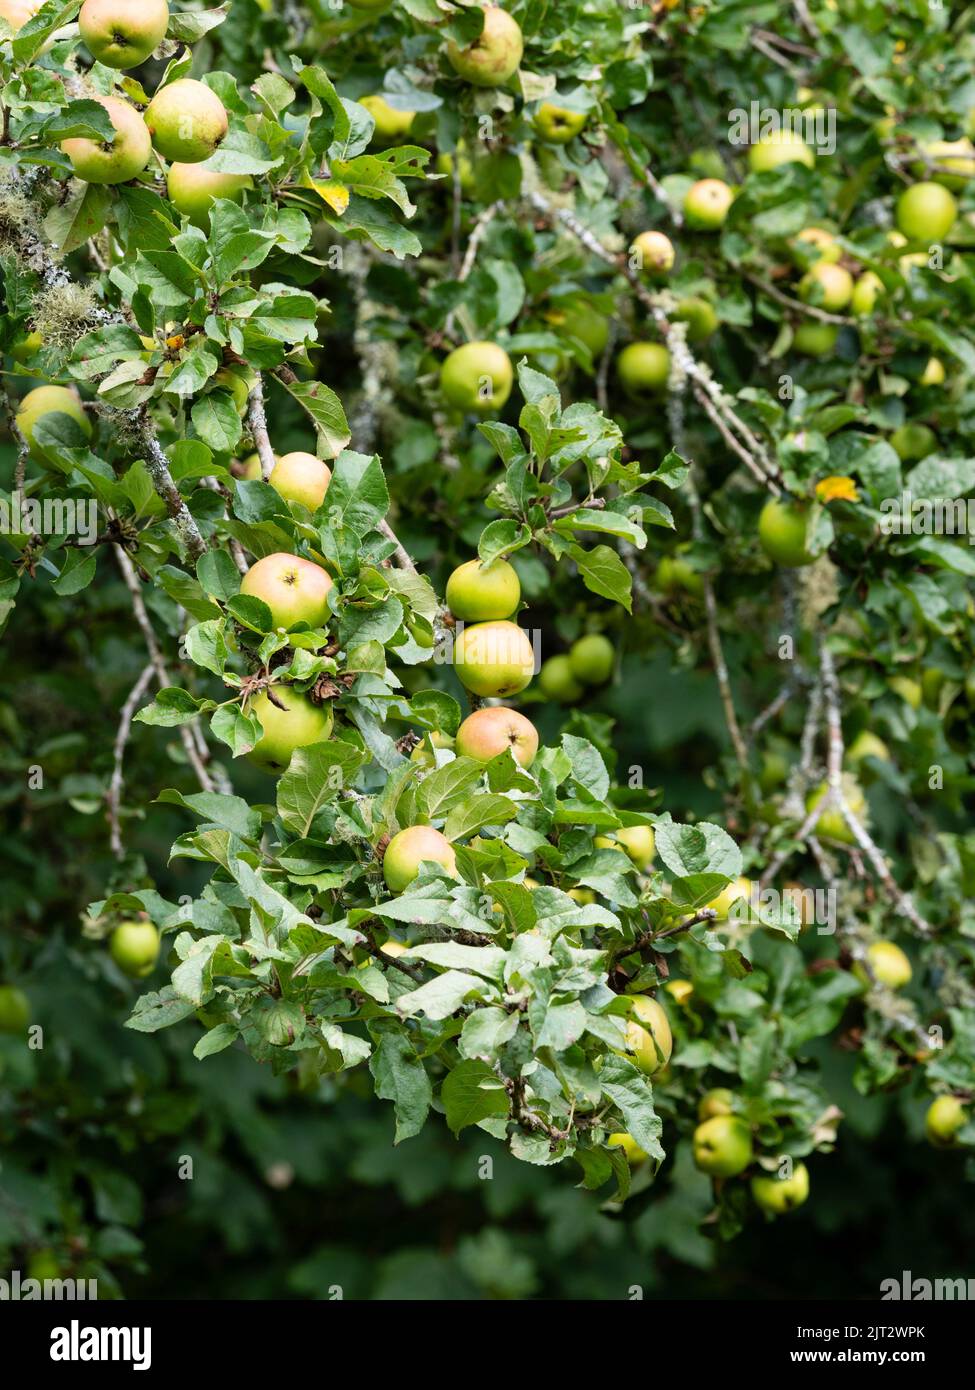 Late summer fruit of the cooking apple, Malus x domestica 'Improved Keswick' Stock Photo